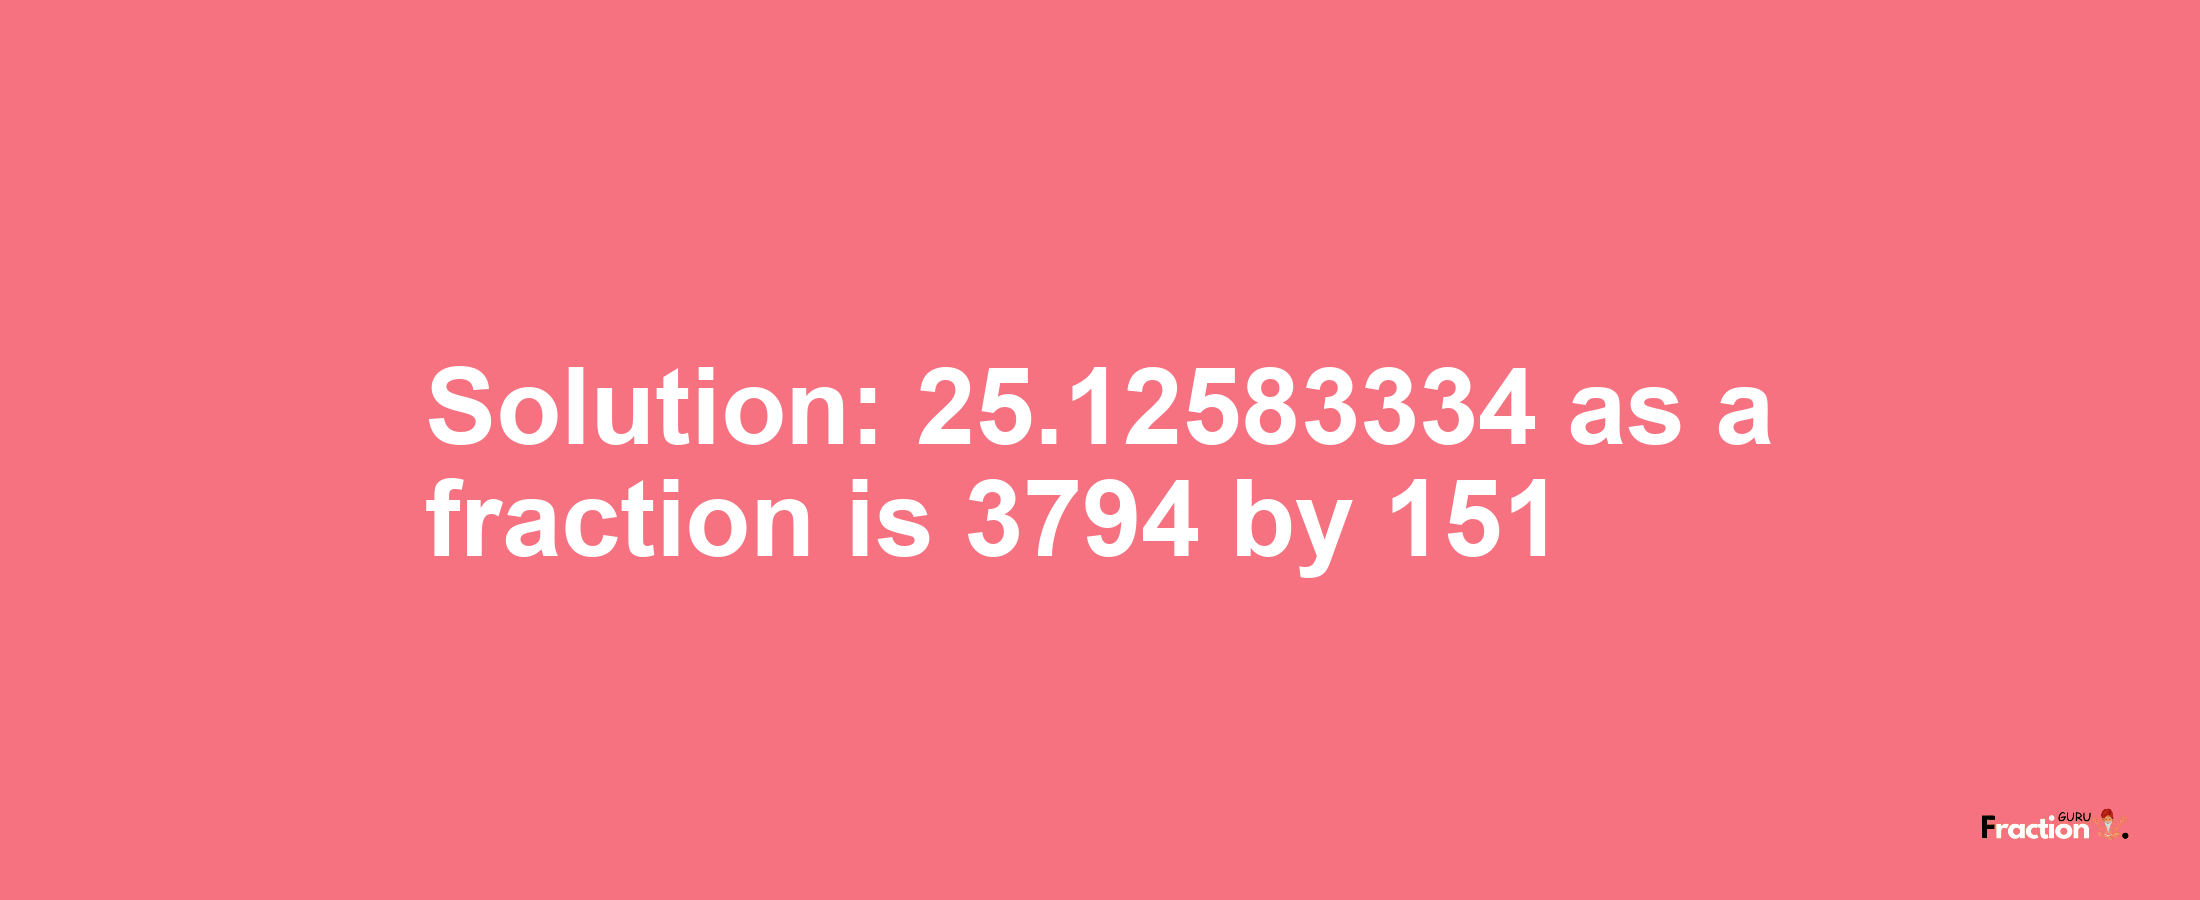 Solution:25.12583334 as a fraction is 3794/151